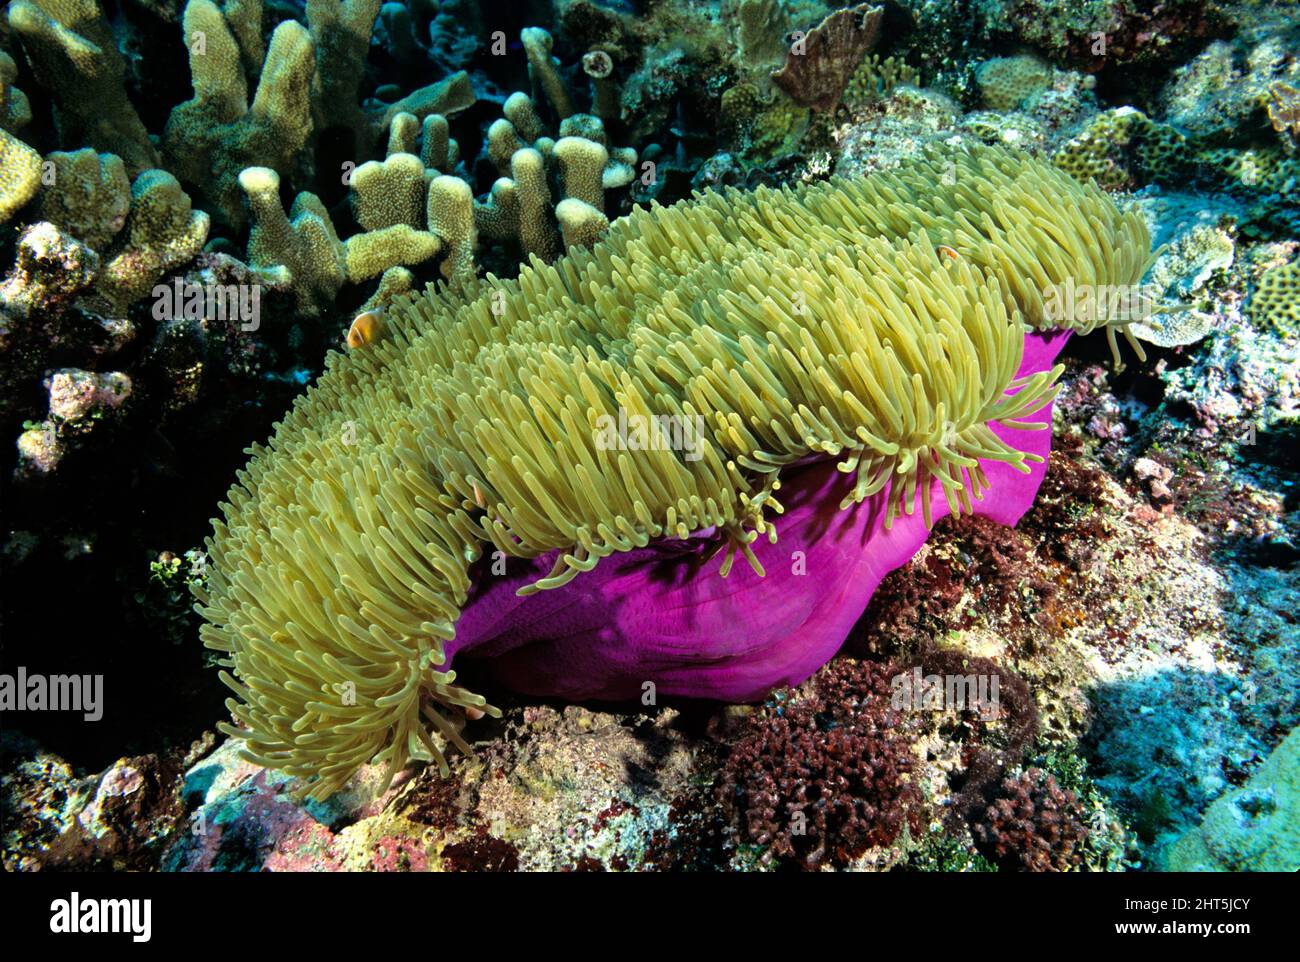 Magnificent sea anemone (Heteractis magnifica), with symbiotic Pink anemonefish (Amphiprion perideraion). The anemone can grow to a metre across. Stock Photo